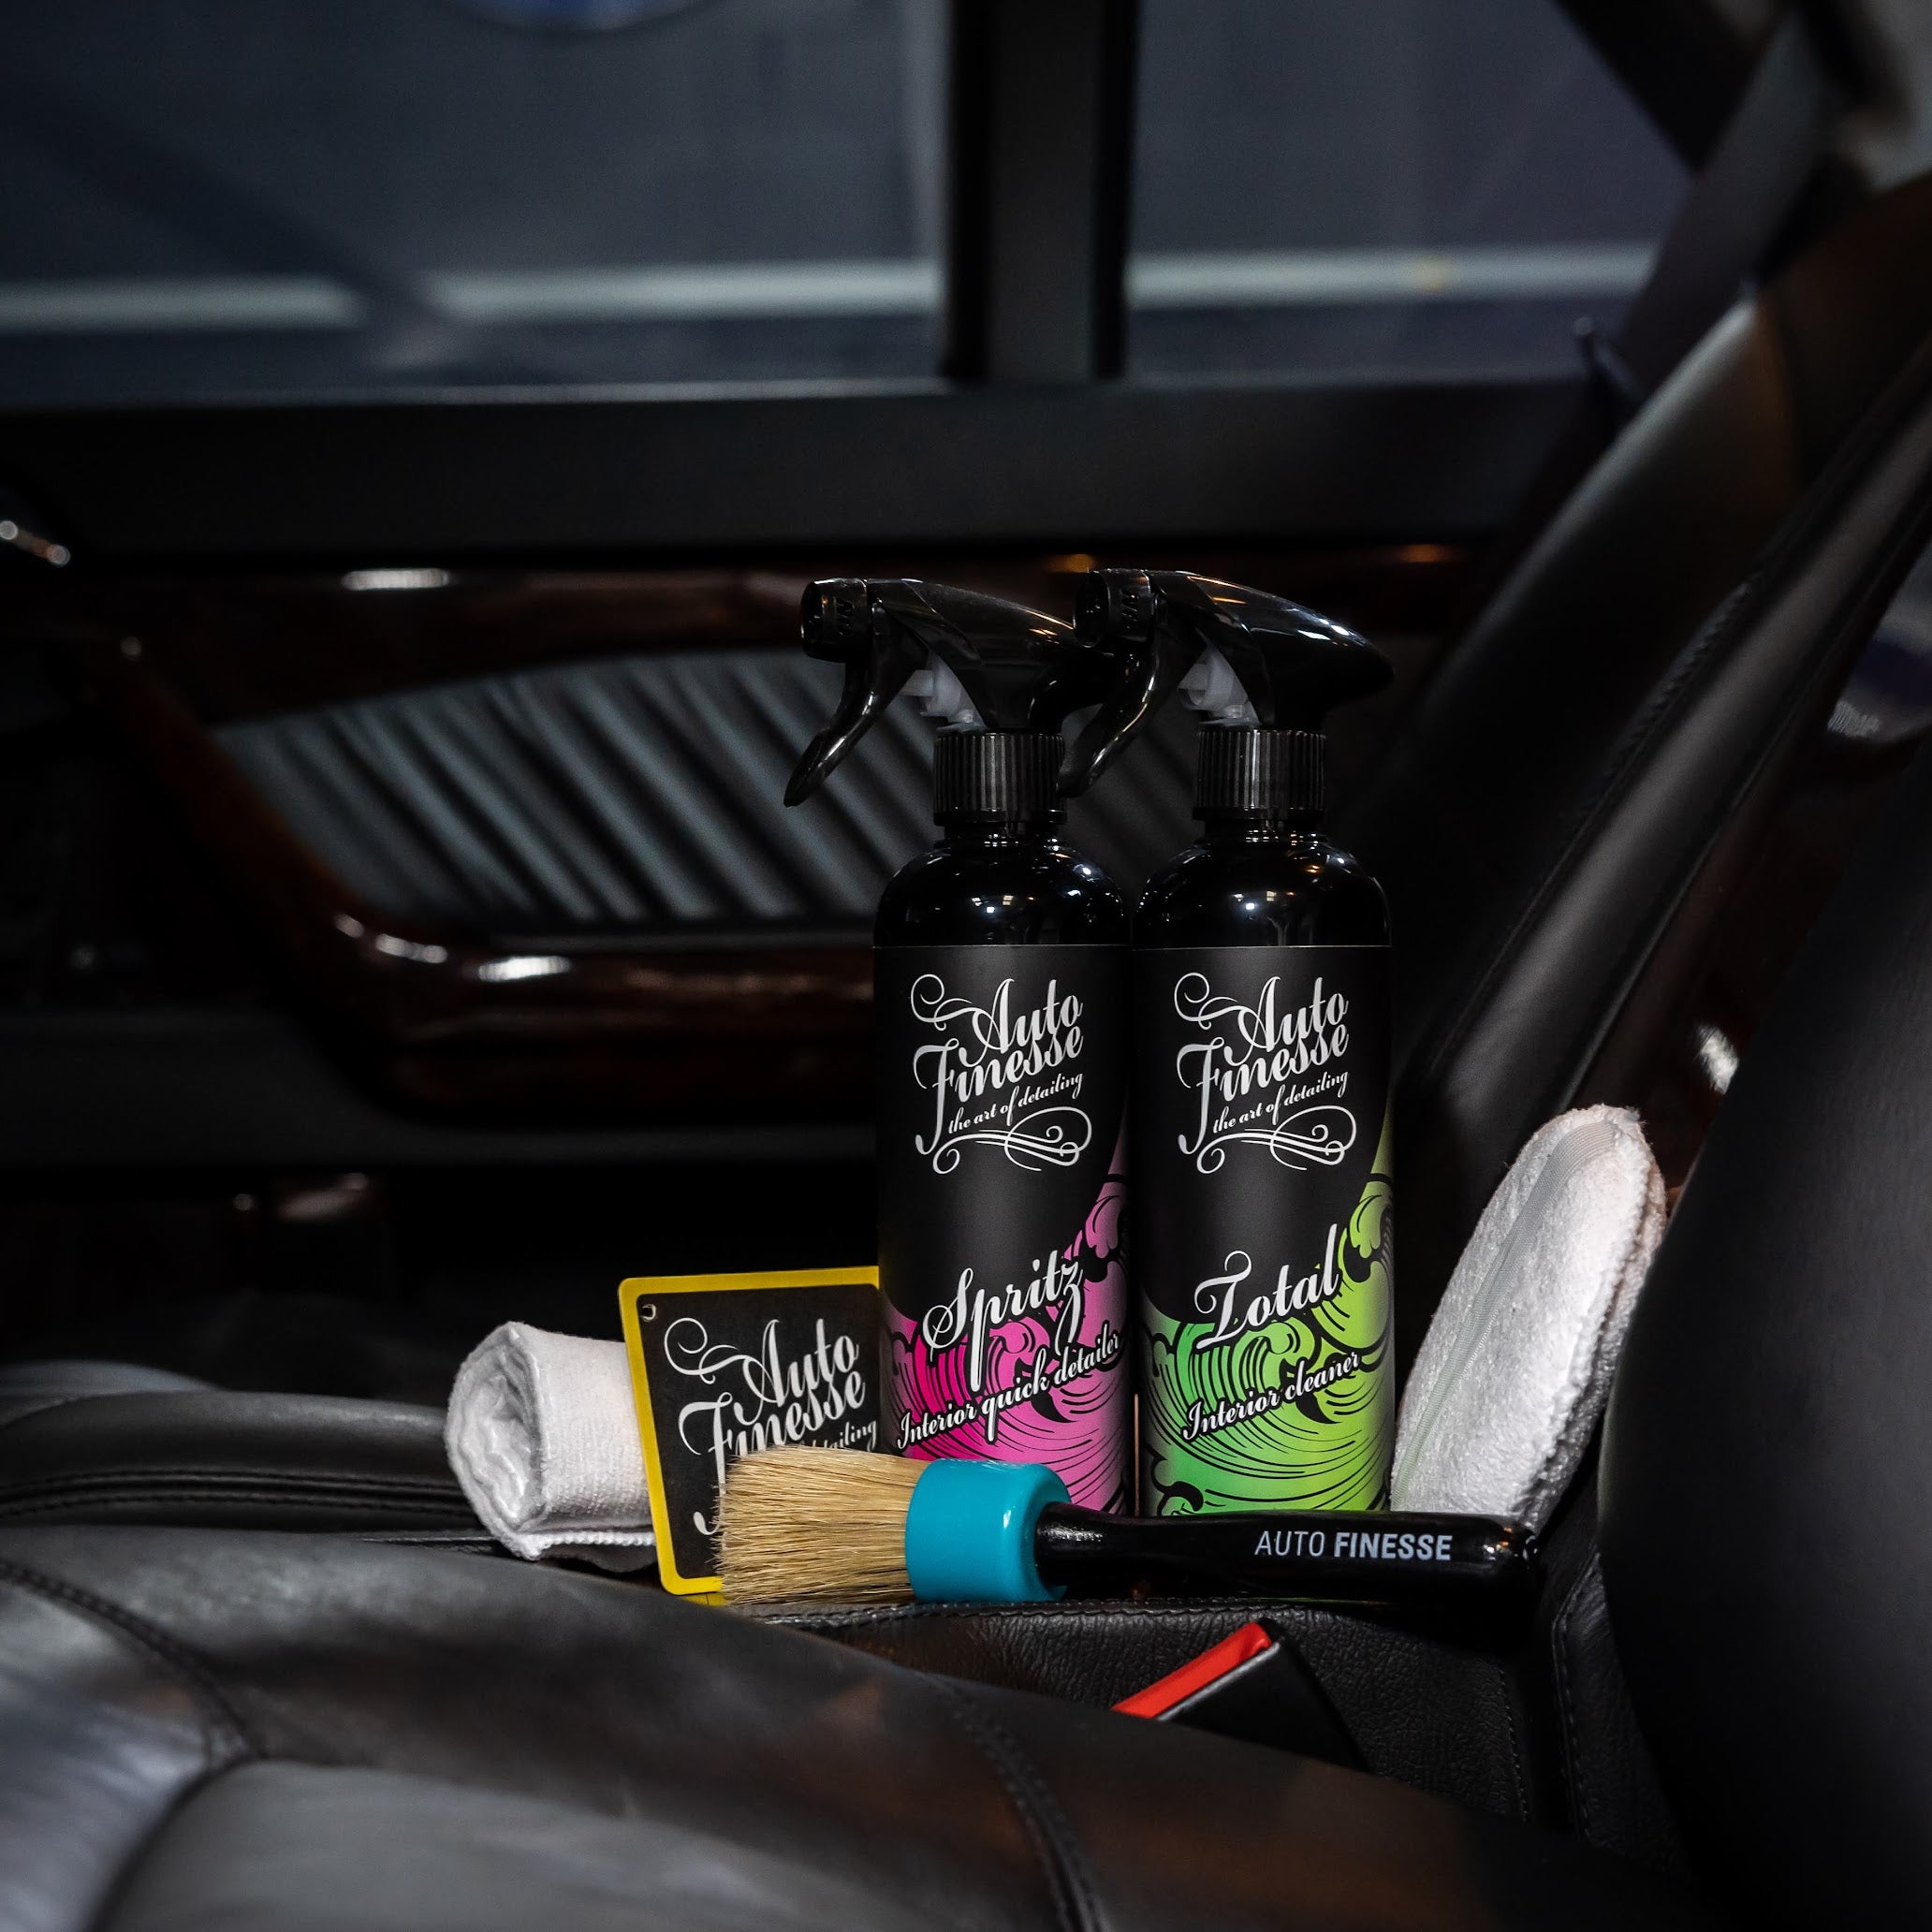 Interior Car Cleaning Kit